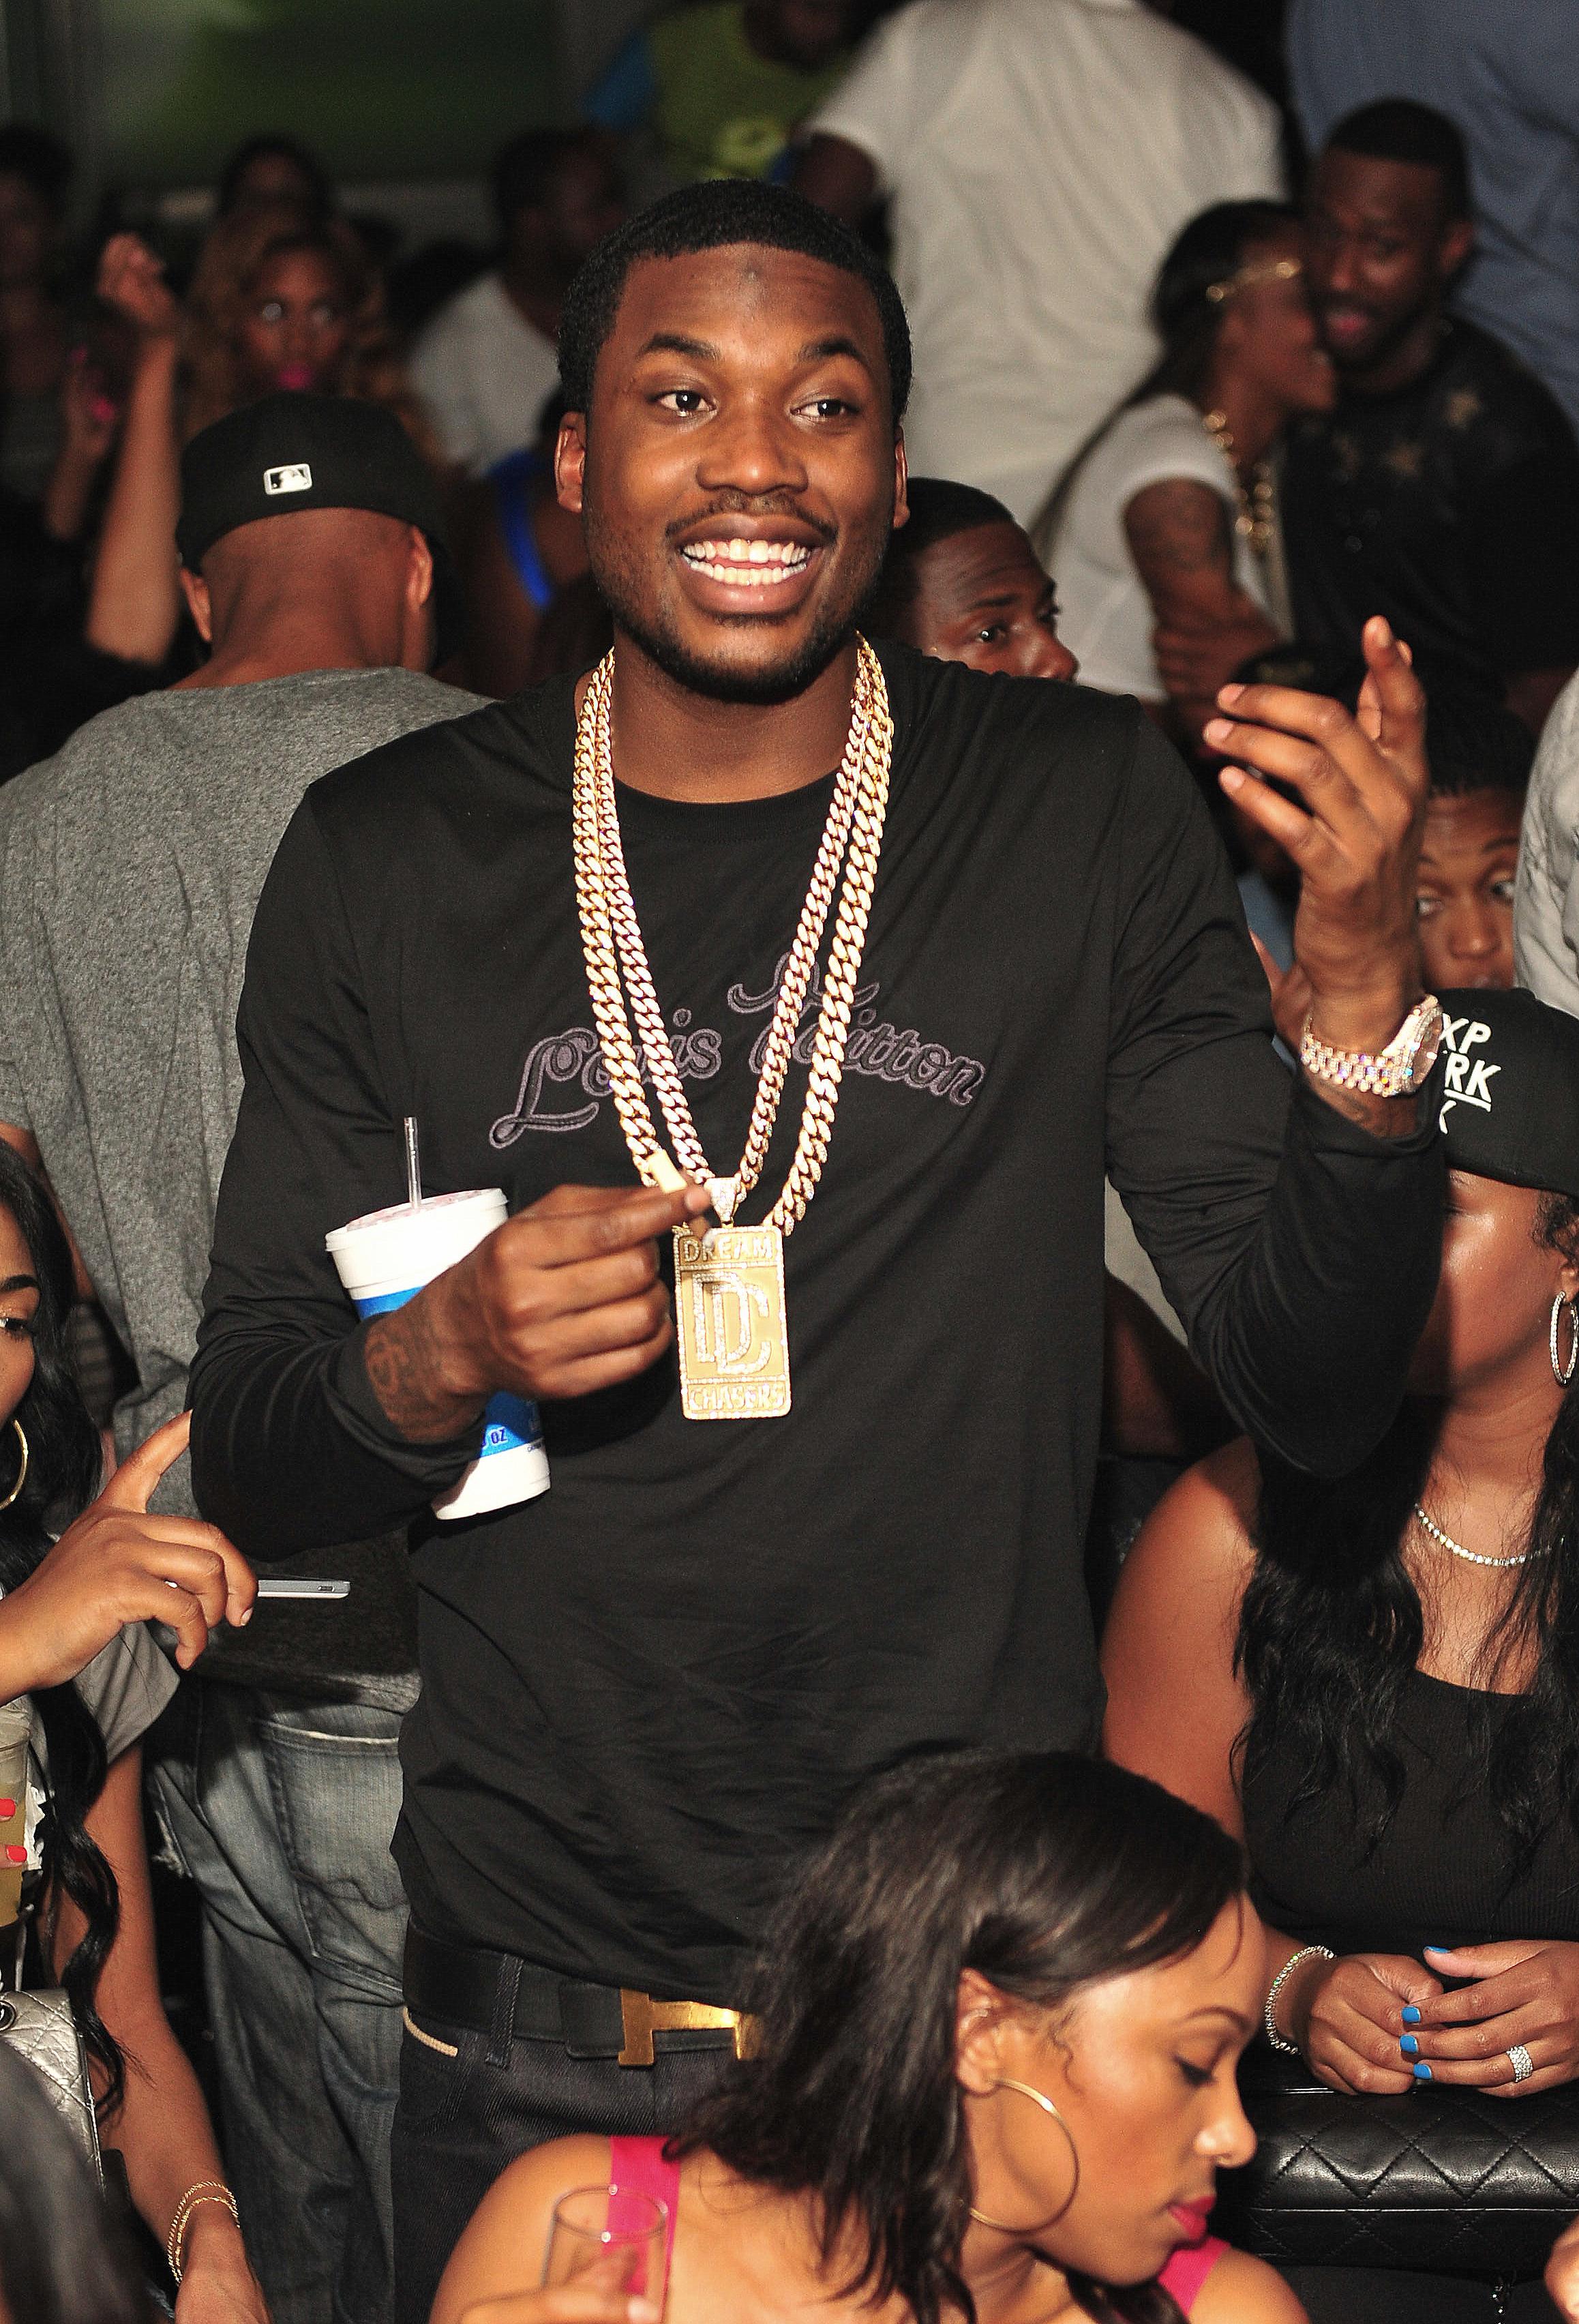 Hot Freestyle on X: Meek Mill is releasing his new album